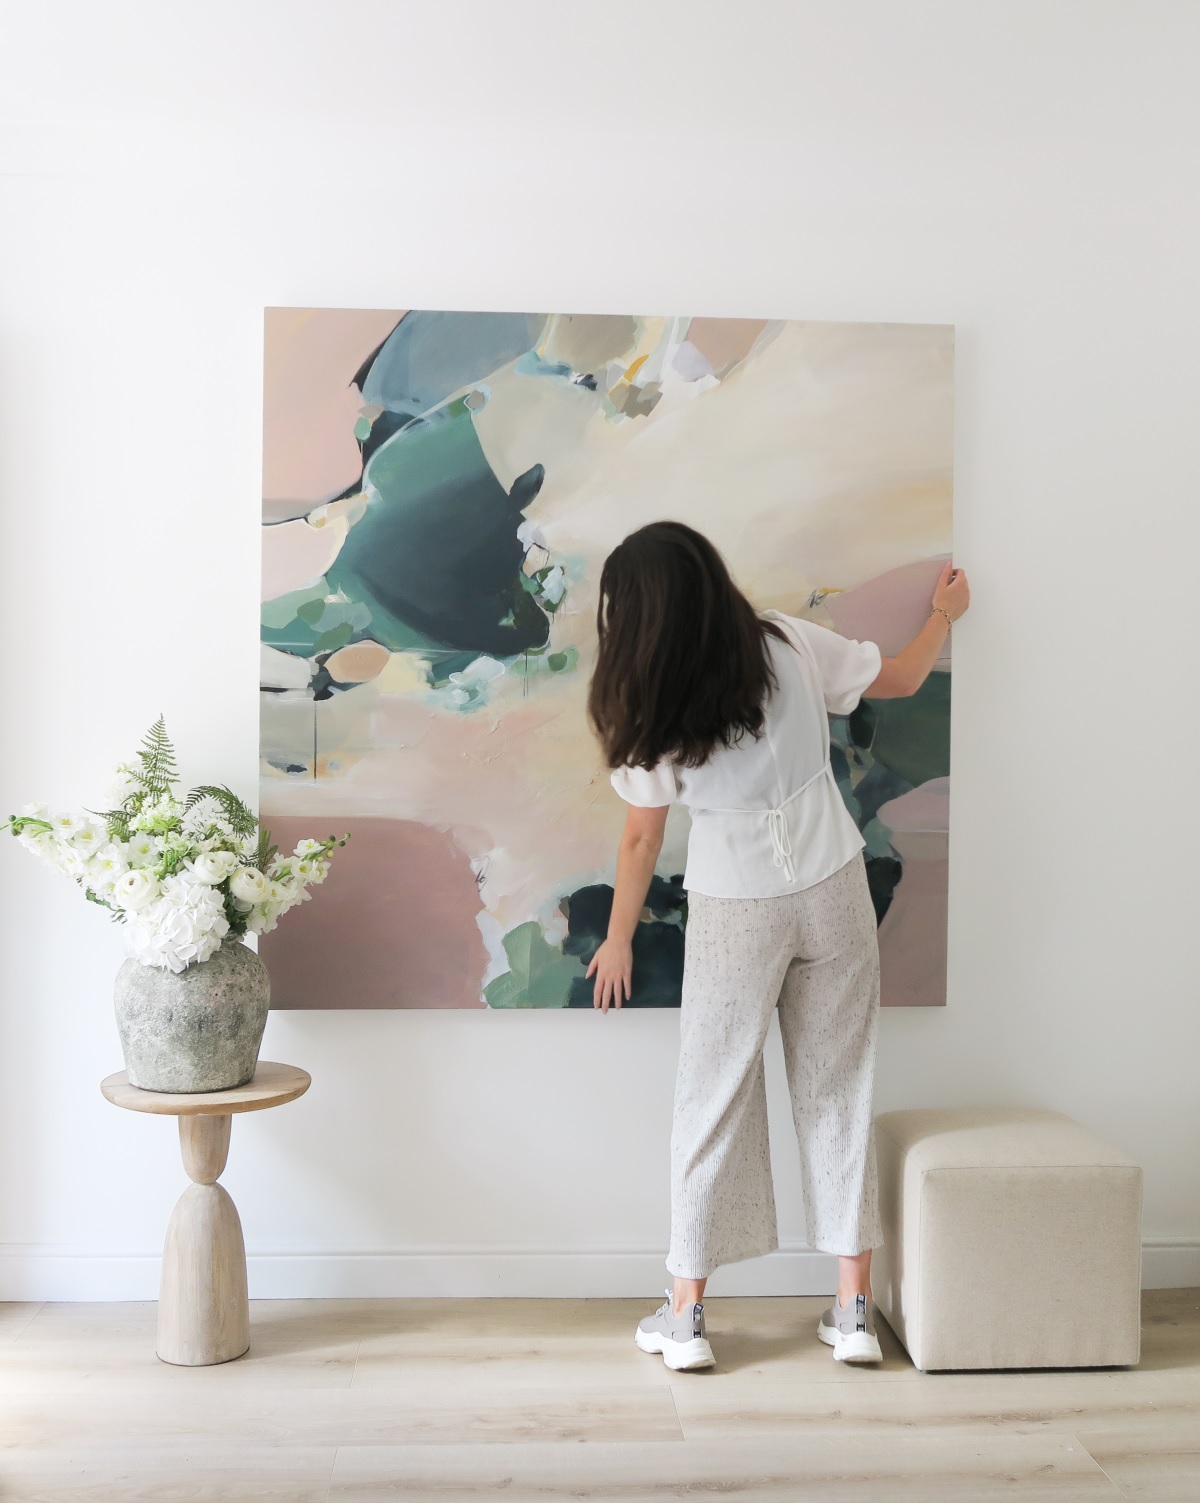 Christina of Christina Boyle Studio in front of one of her paintings on canvas 